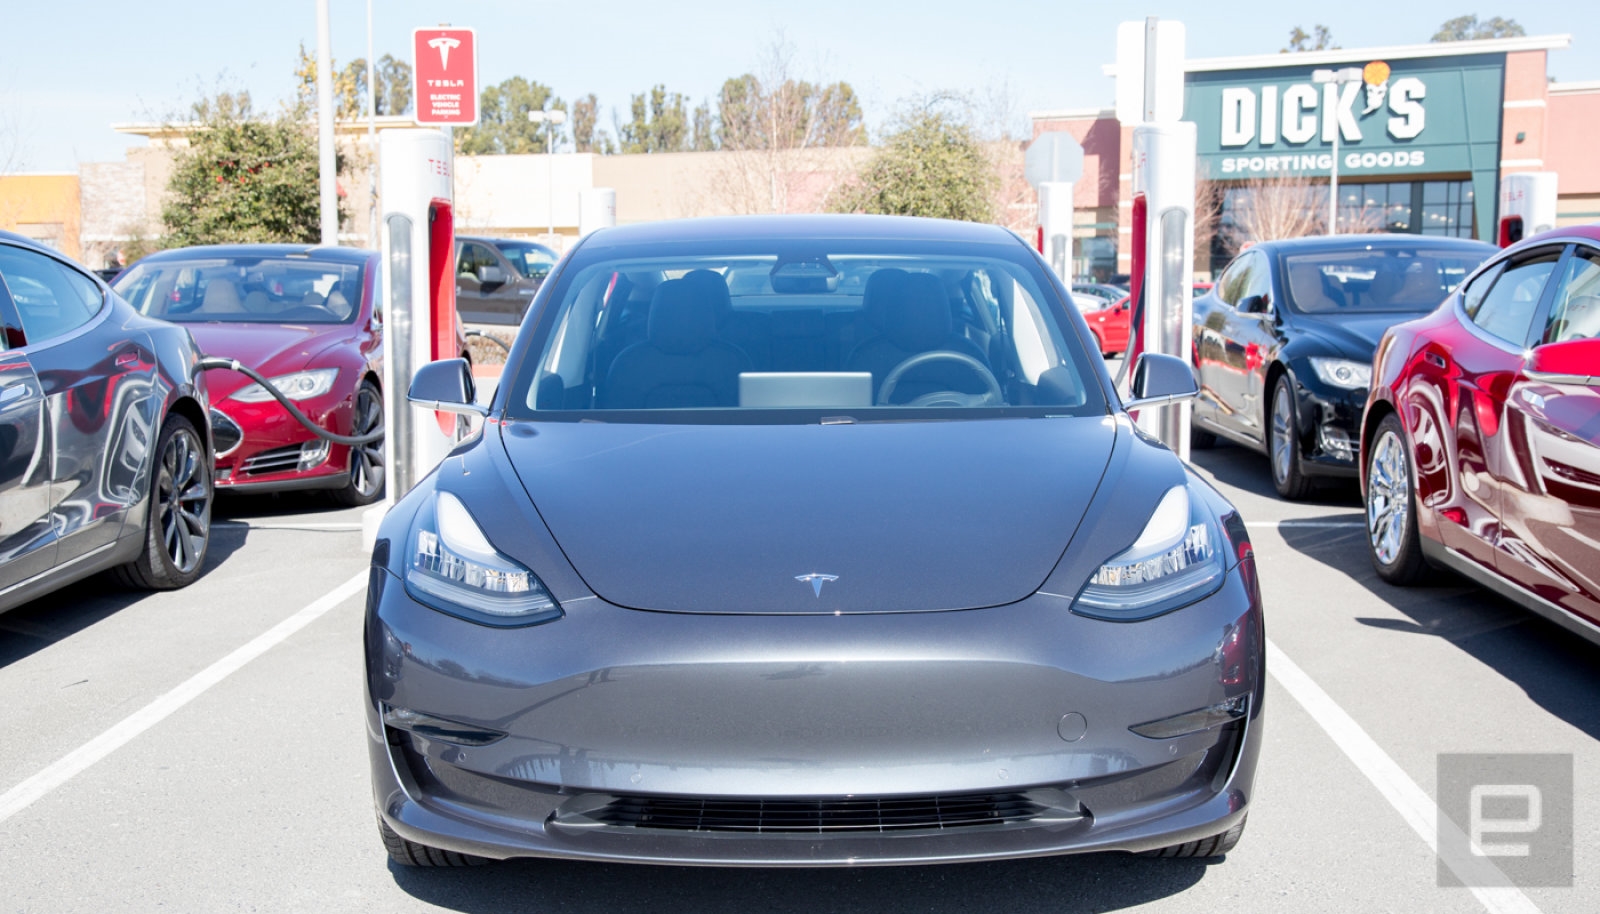 Telsa's Model 3 can now use DC fast chargers across the US | DeviceDaily.com